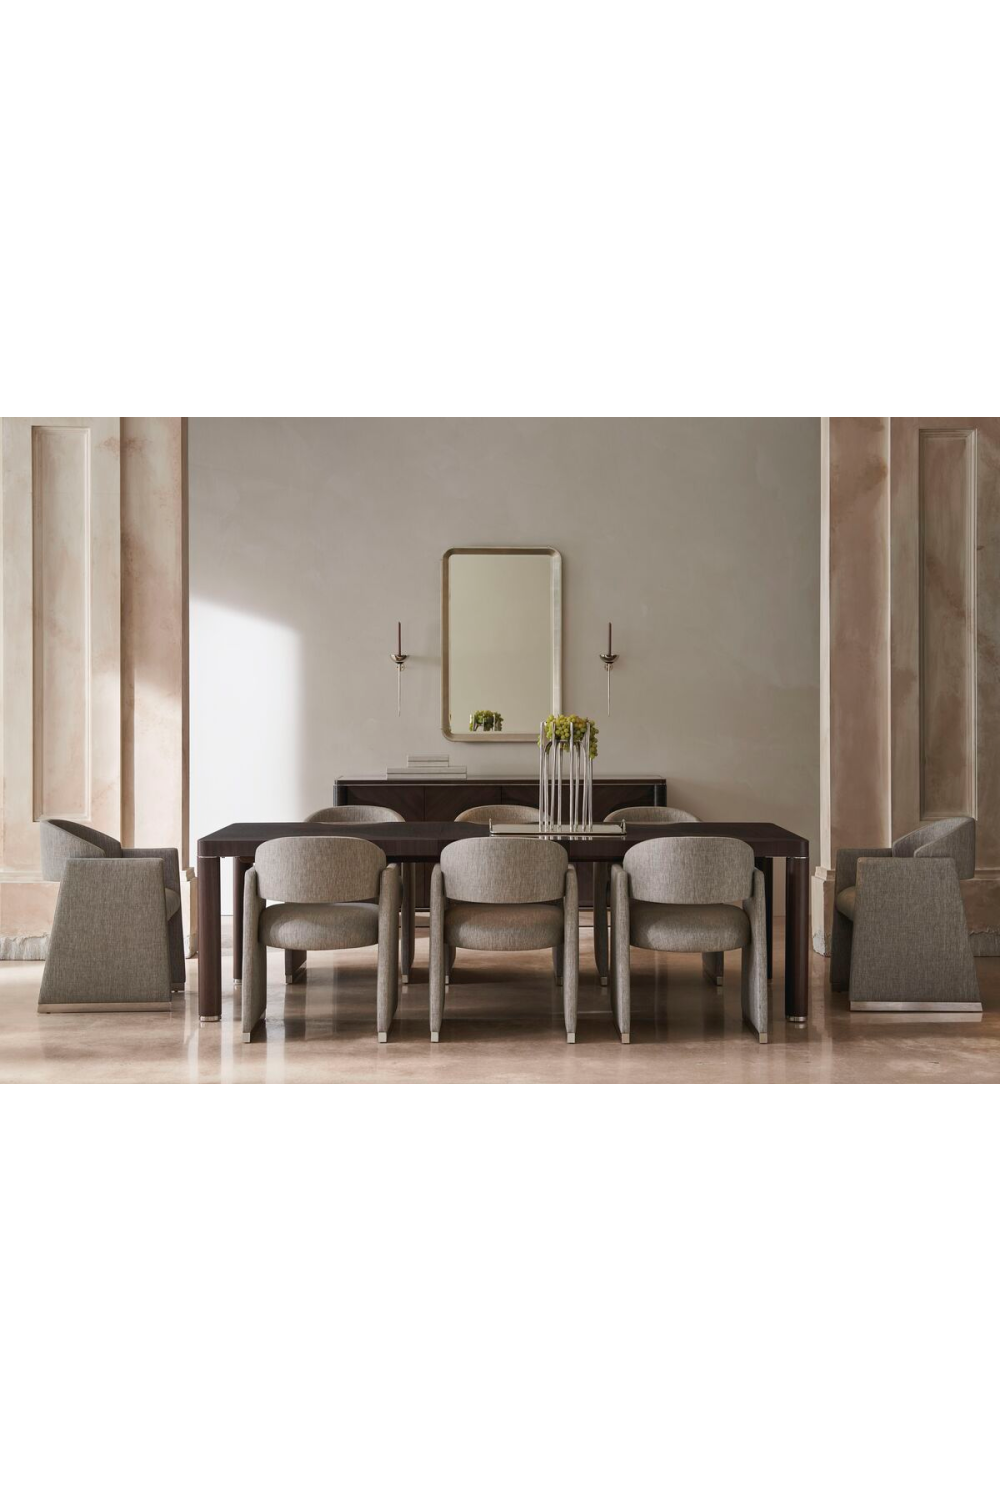 Parsons-Style Dining Table | Caracole Mirror Image | Oroa.com